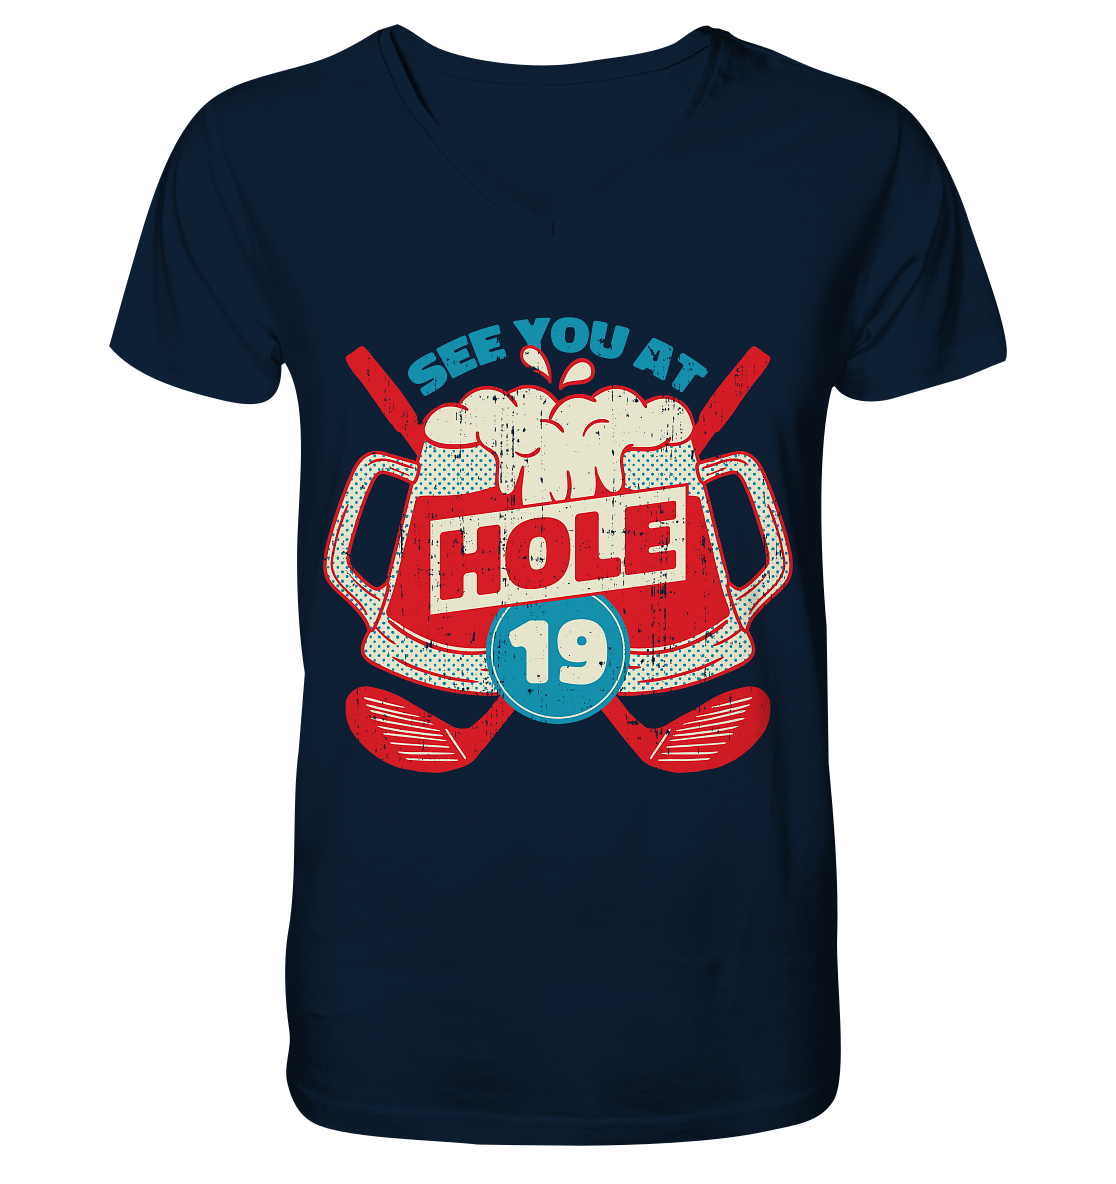 Golf ,See you at Hole 19 , Wir sehen uns bei Loch 19 - V-Neck Shirt